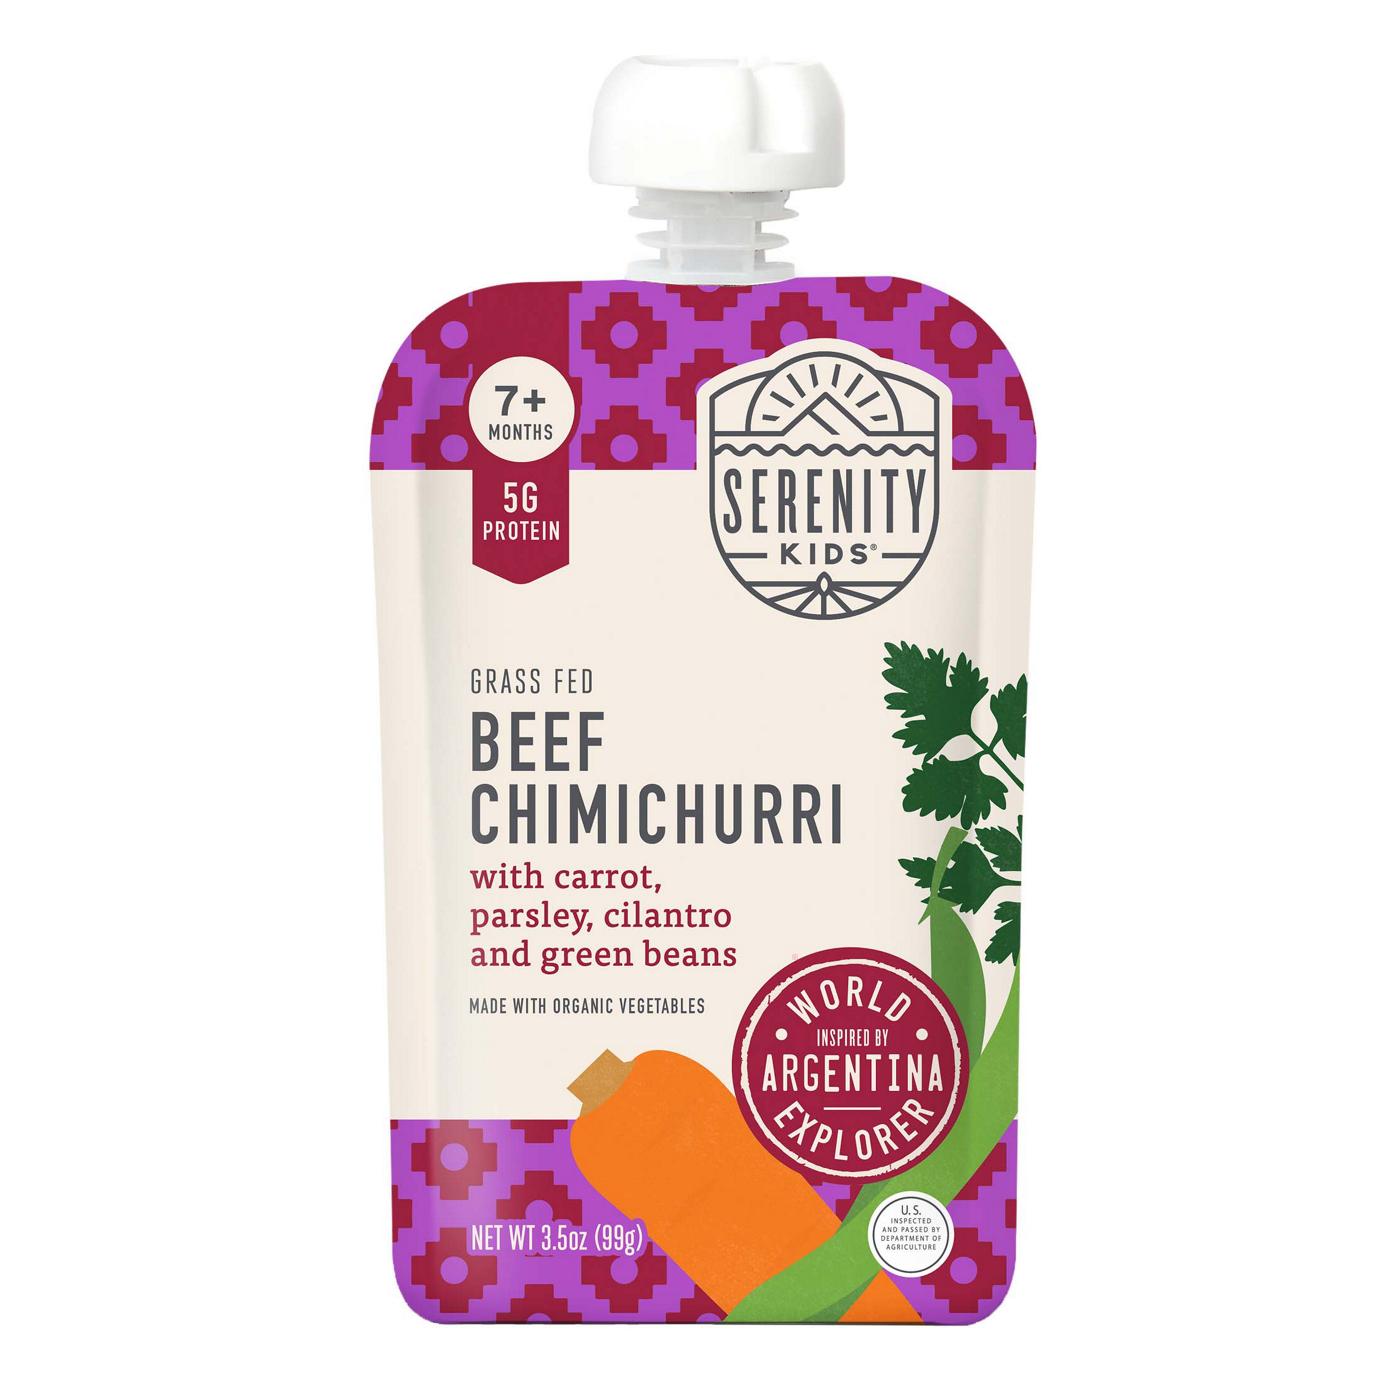 Serenity Kids Baby Food Pouch - Grass Fed Beef Chimichurri; image 1 of 2